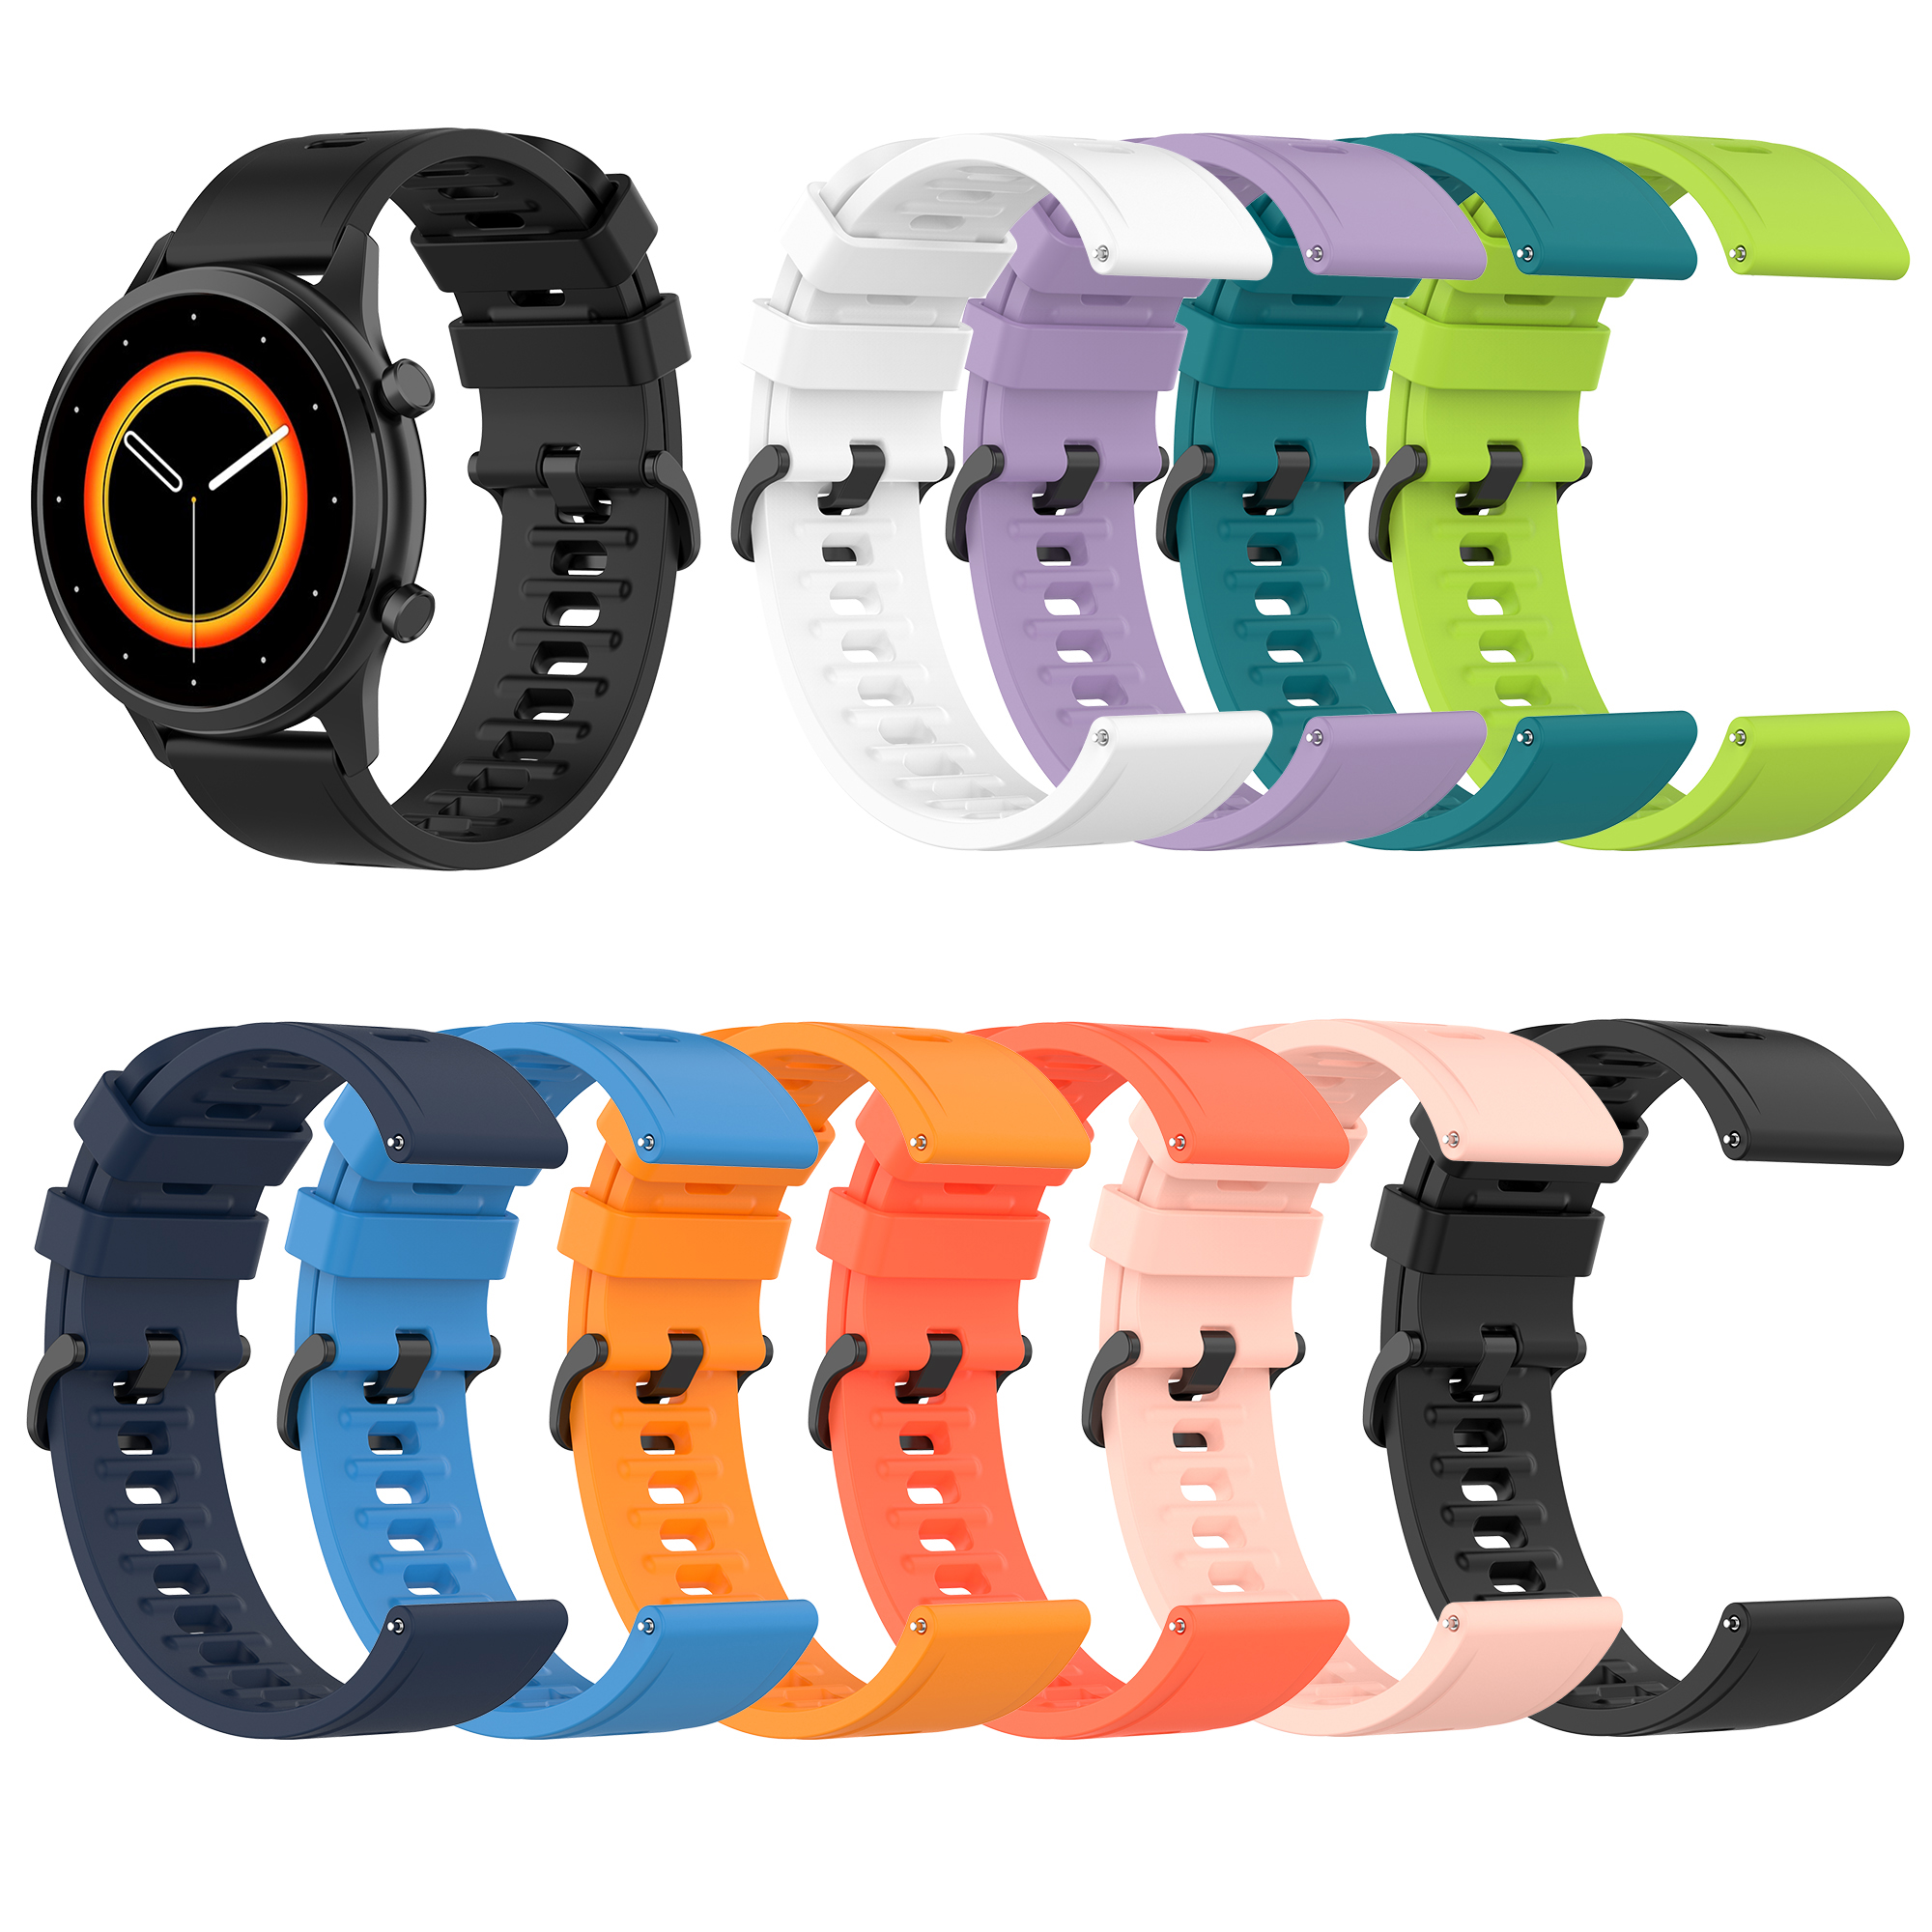 Bakeey-2022mm-Pure-Color-Sweatproof-Soft-Silicone-Watch-Band-Strap-Replacement-for-Garmin-Vivowatch-1773645-2